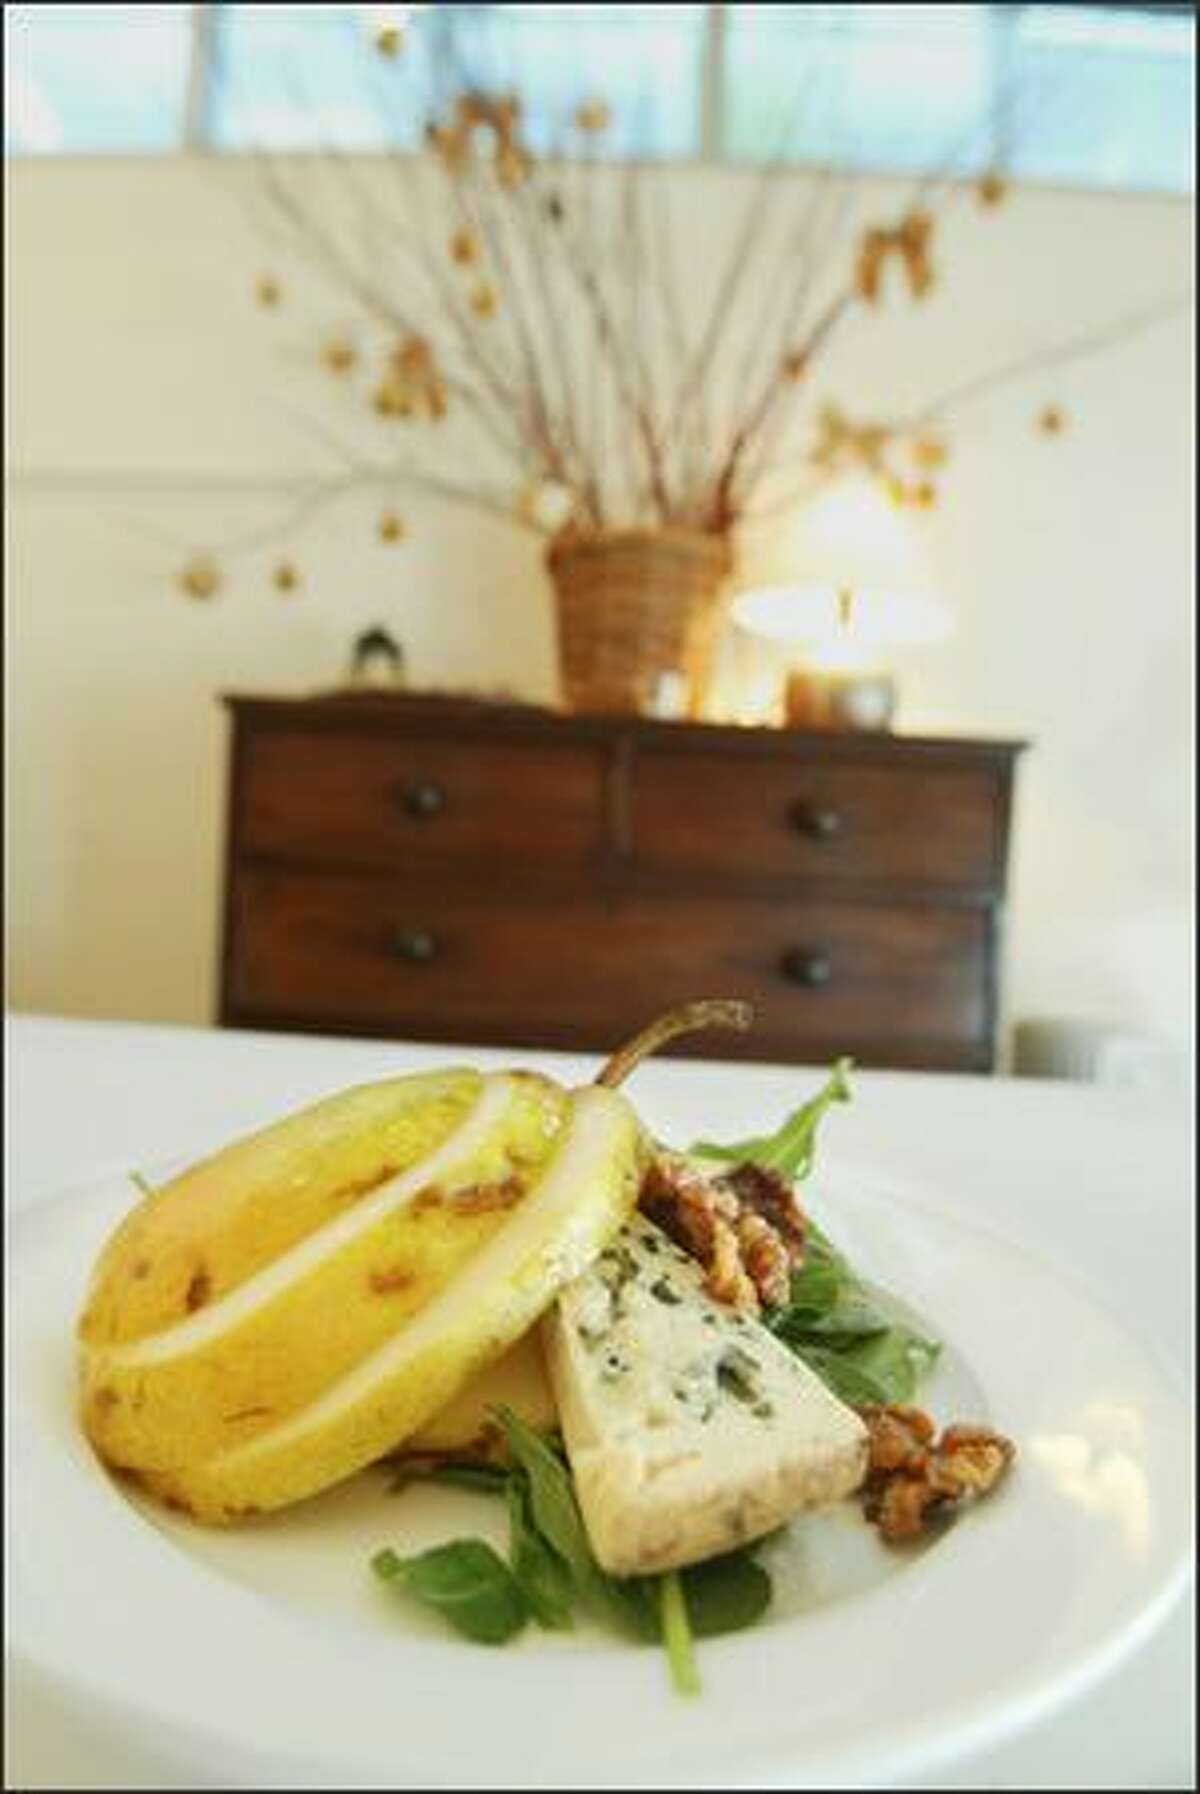 Erickson cuts pears into loose rounds for this mixed-green salad with bleu d'auvergne cheese and roasted walnuts.